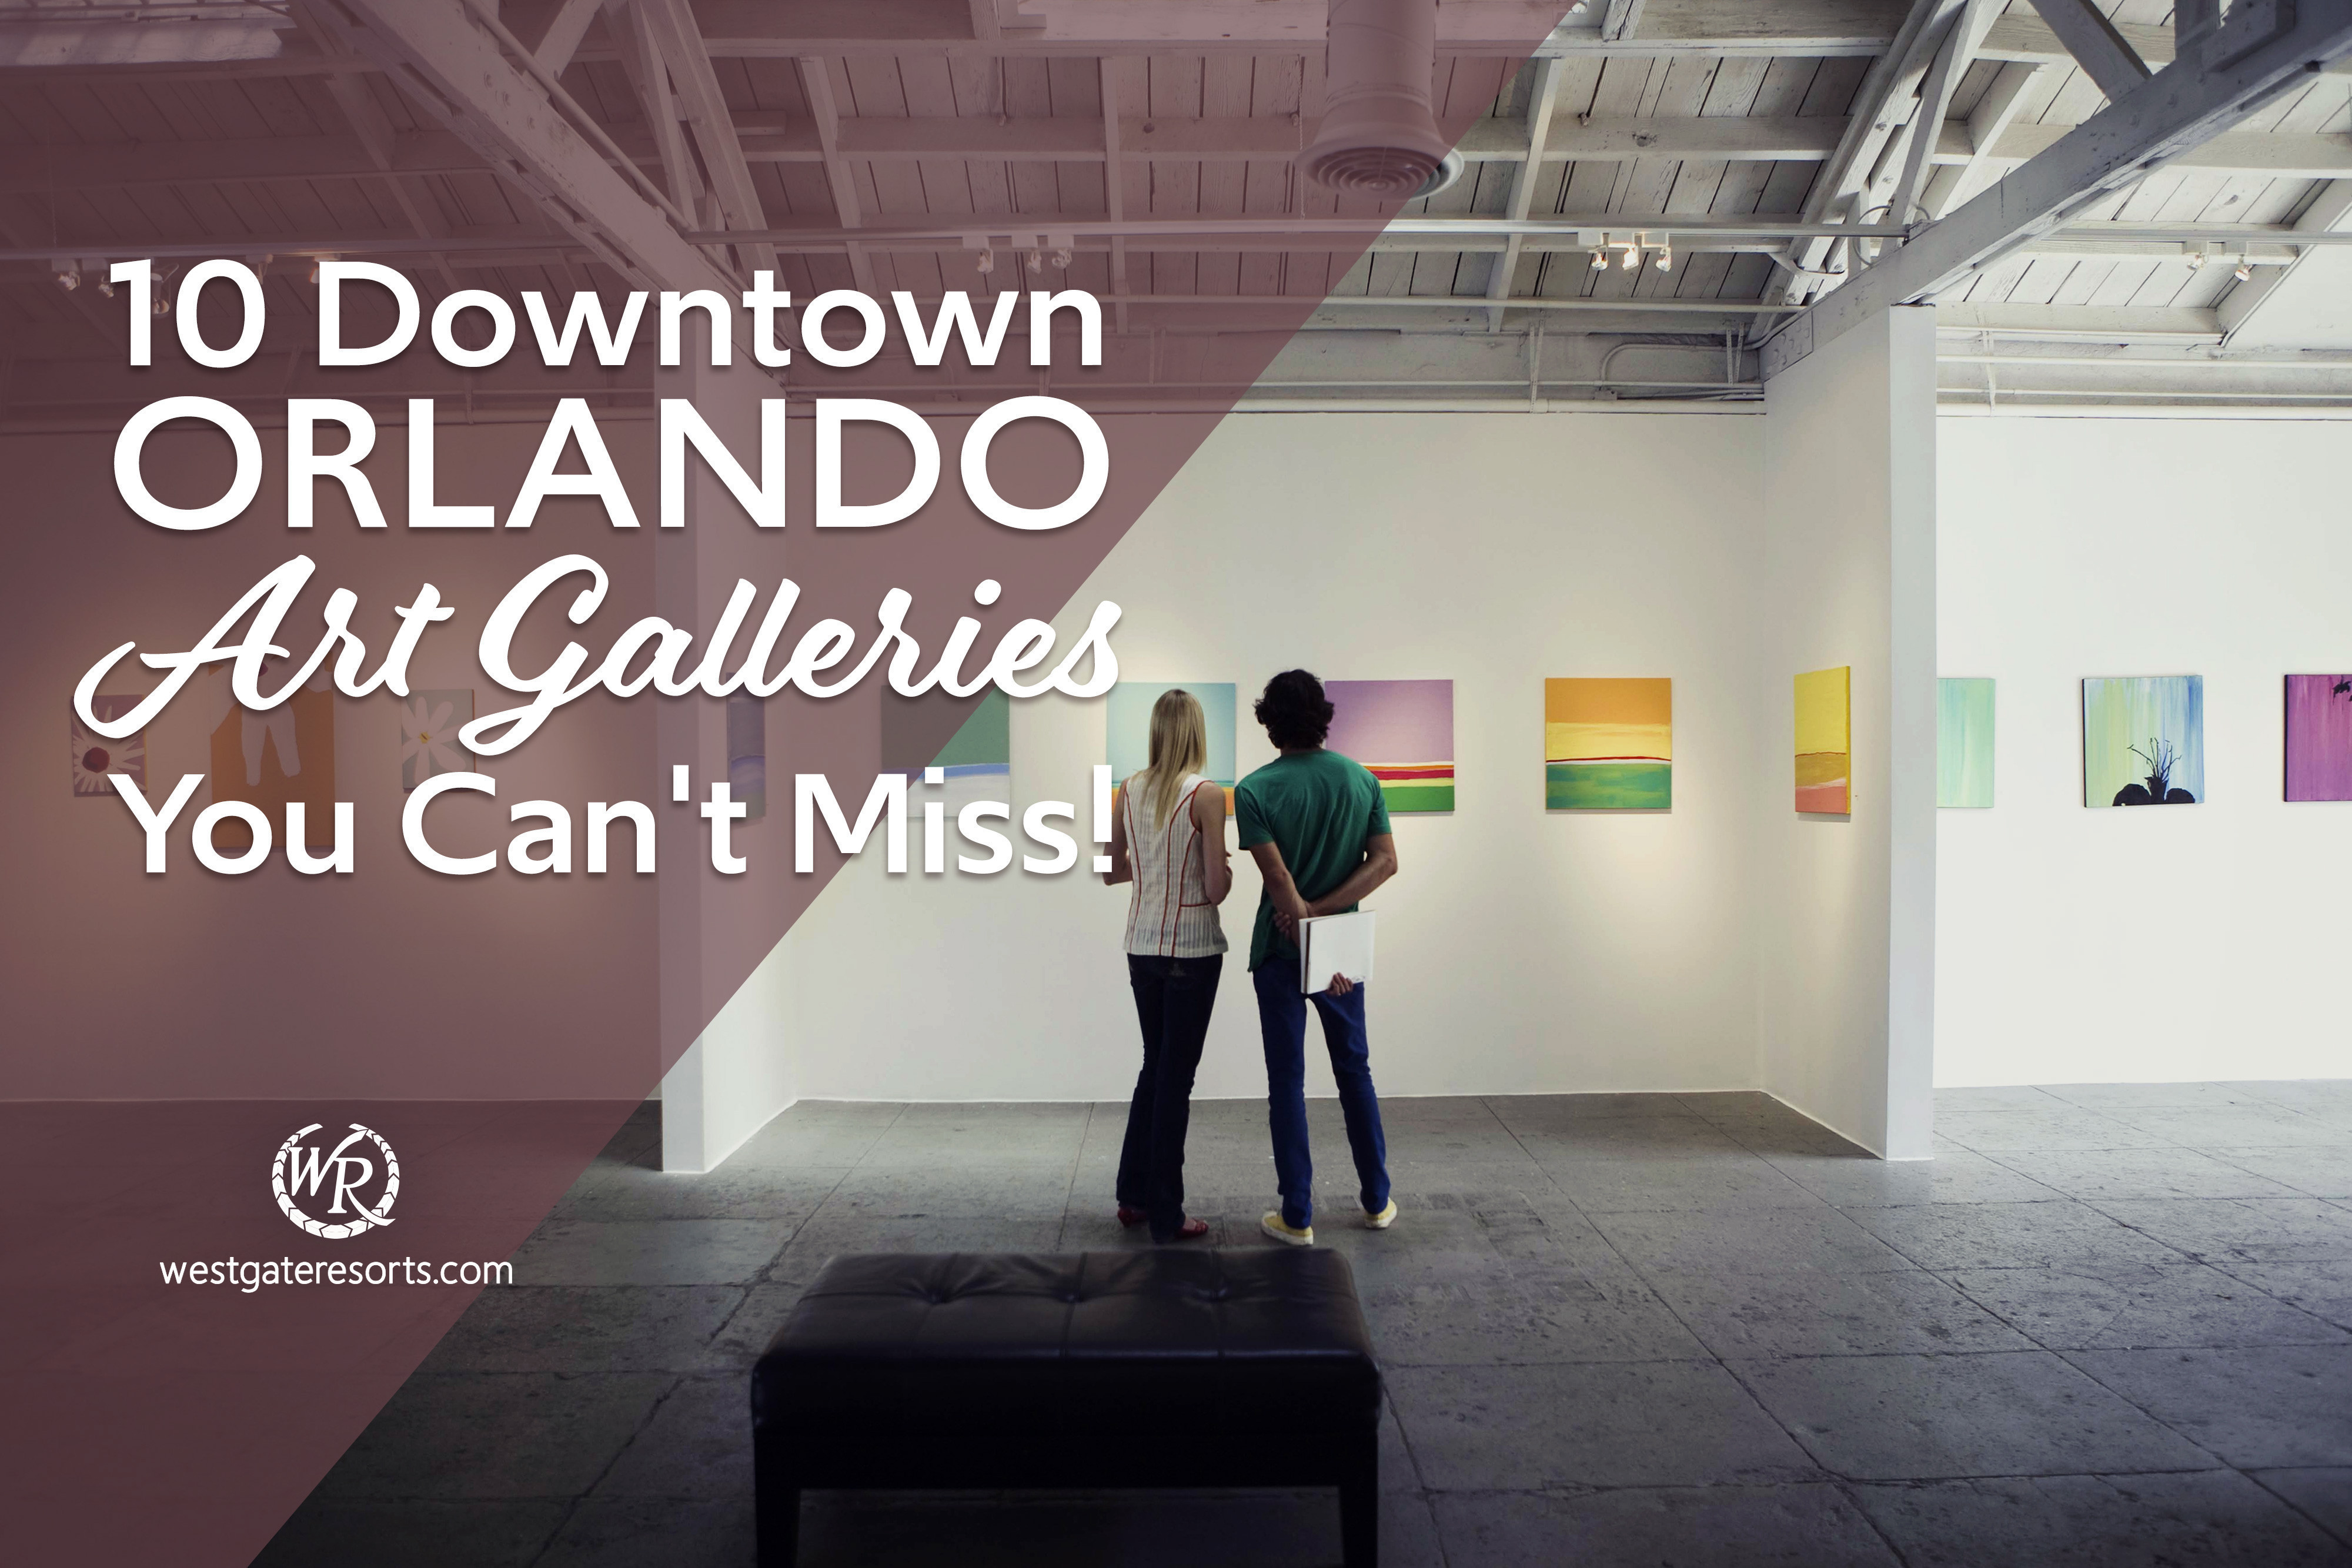 10 Downtown Orlando Art Galleries You Can't Miss!